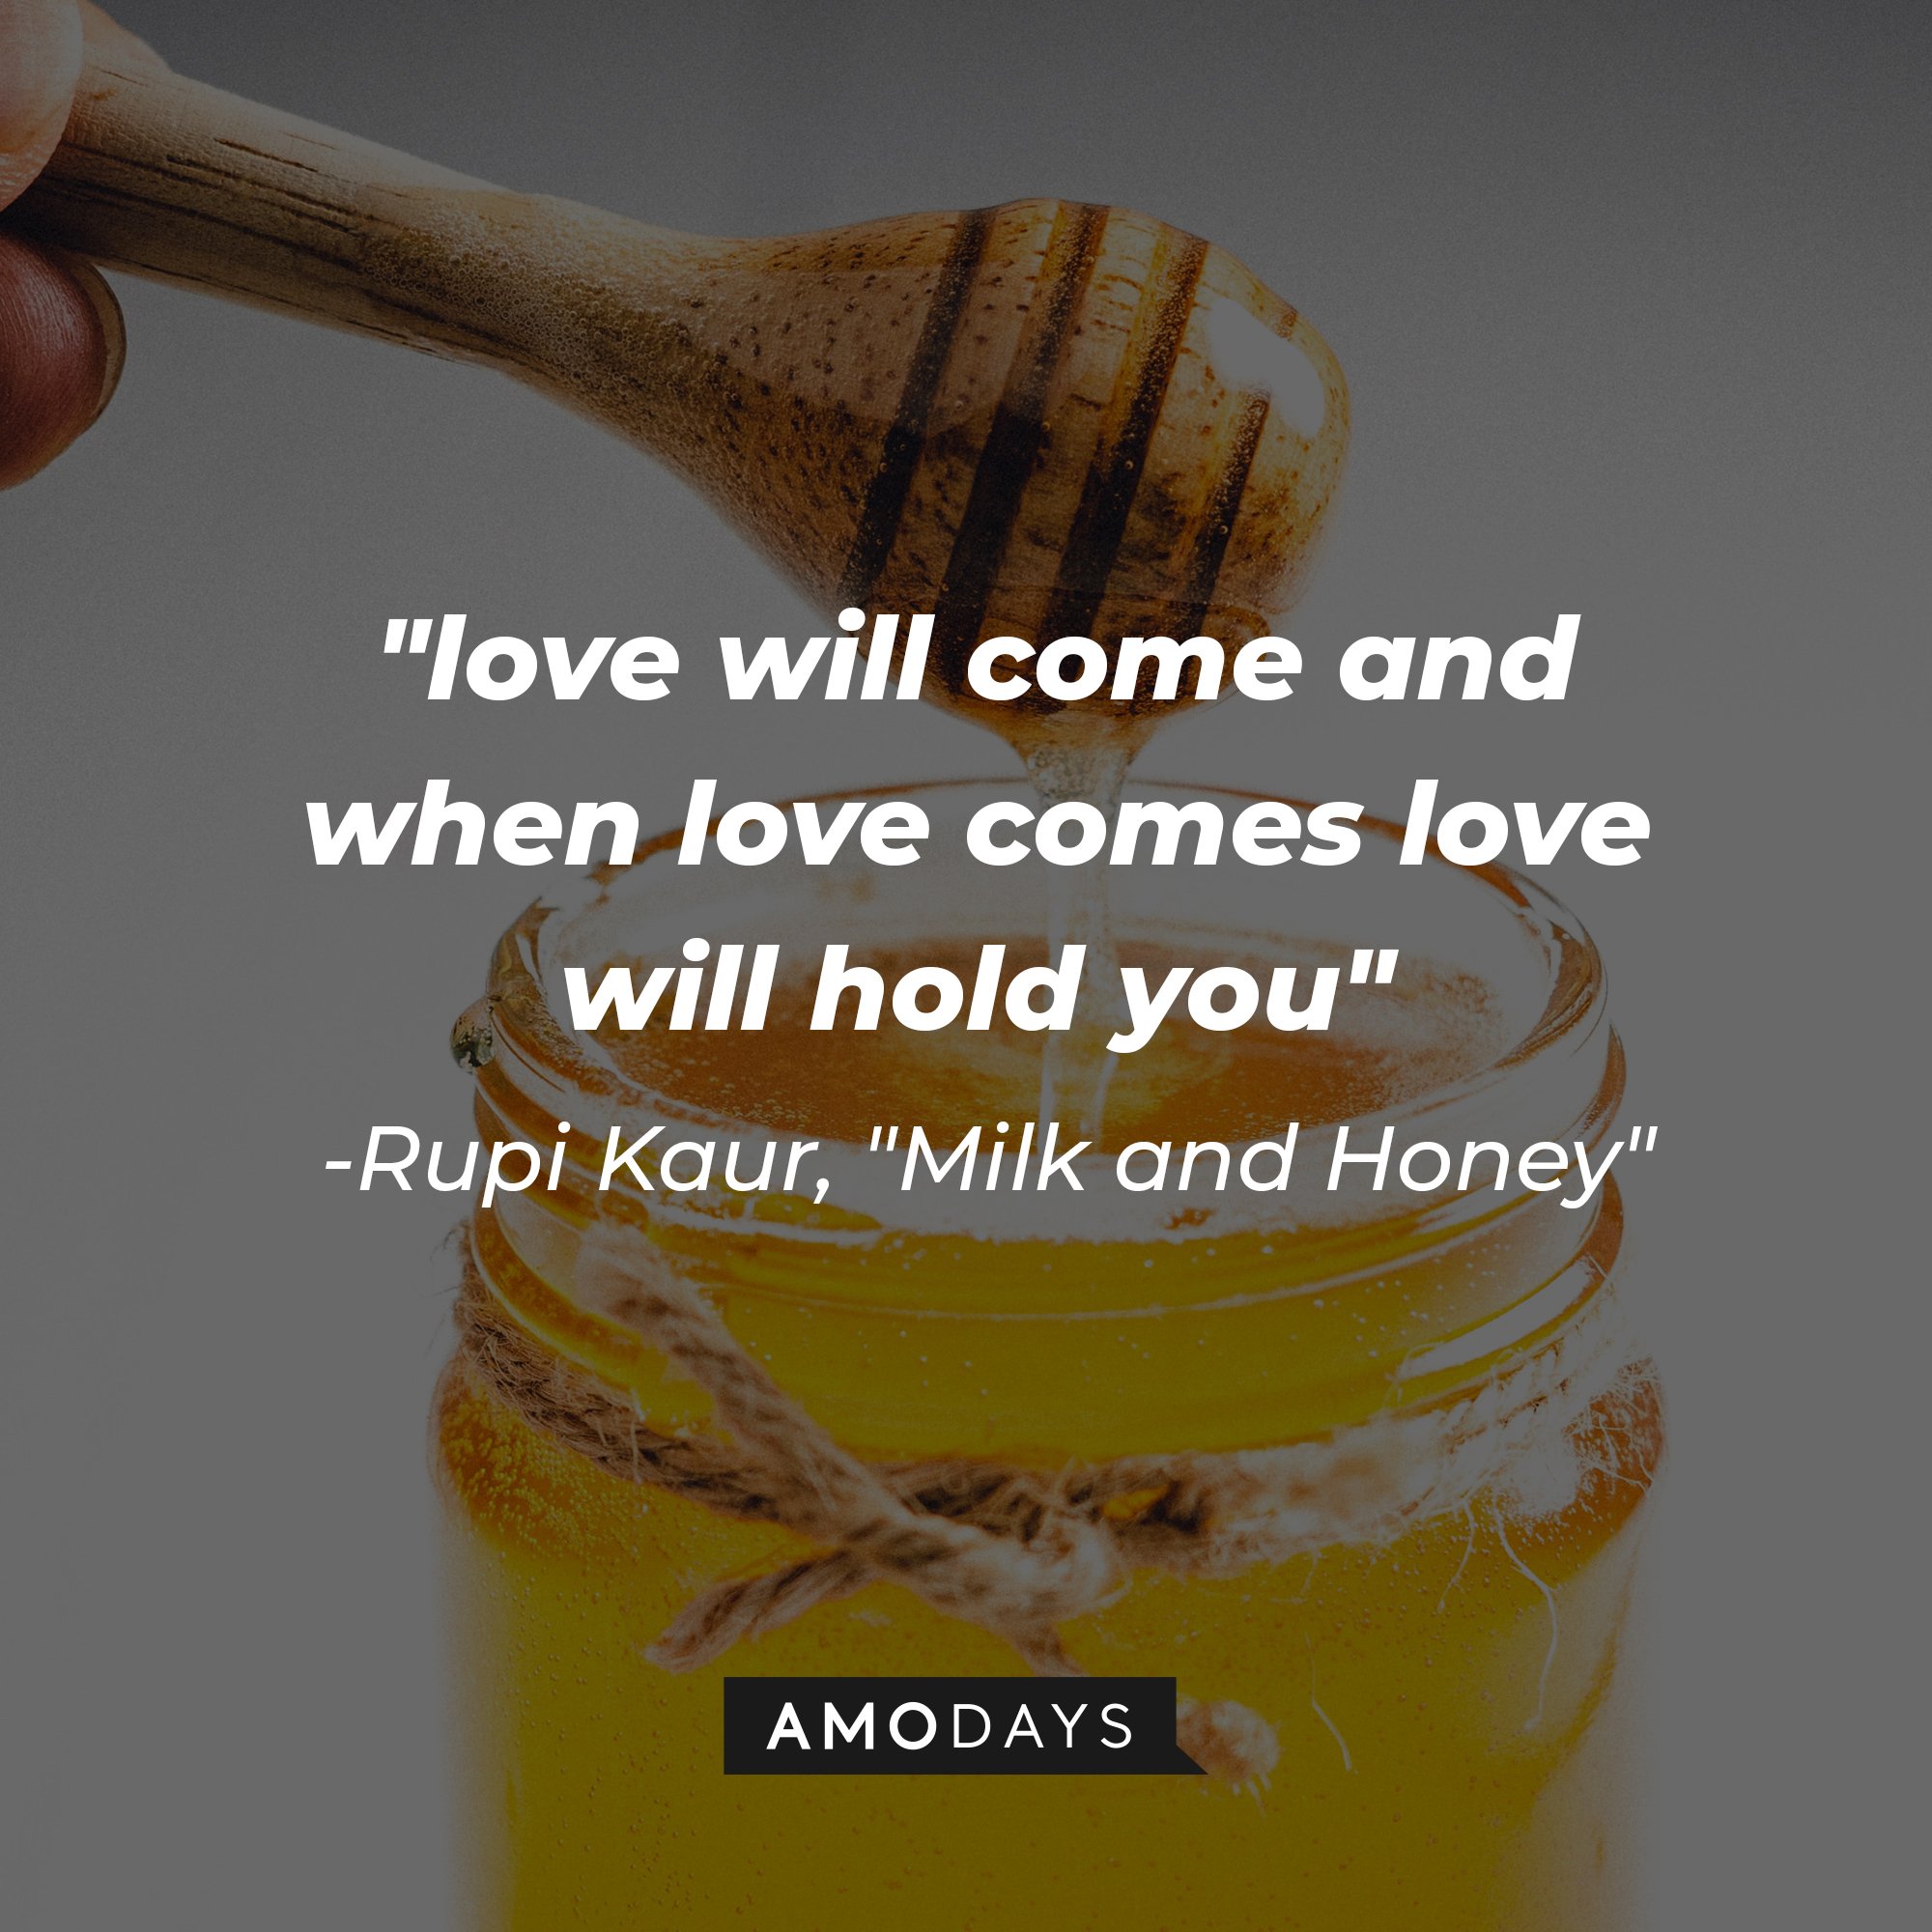 Rupi Kaur's "The Loving" quote: "love will come and when love comes love will hold you" | Image: AmoDays